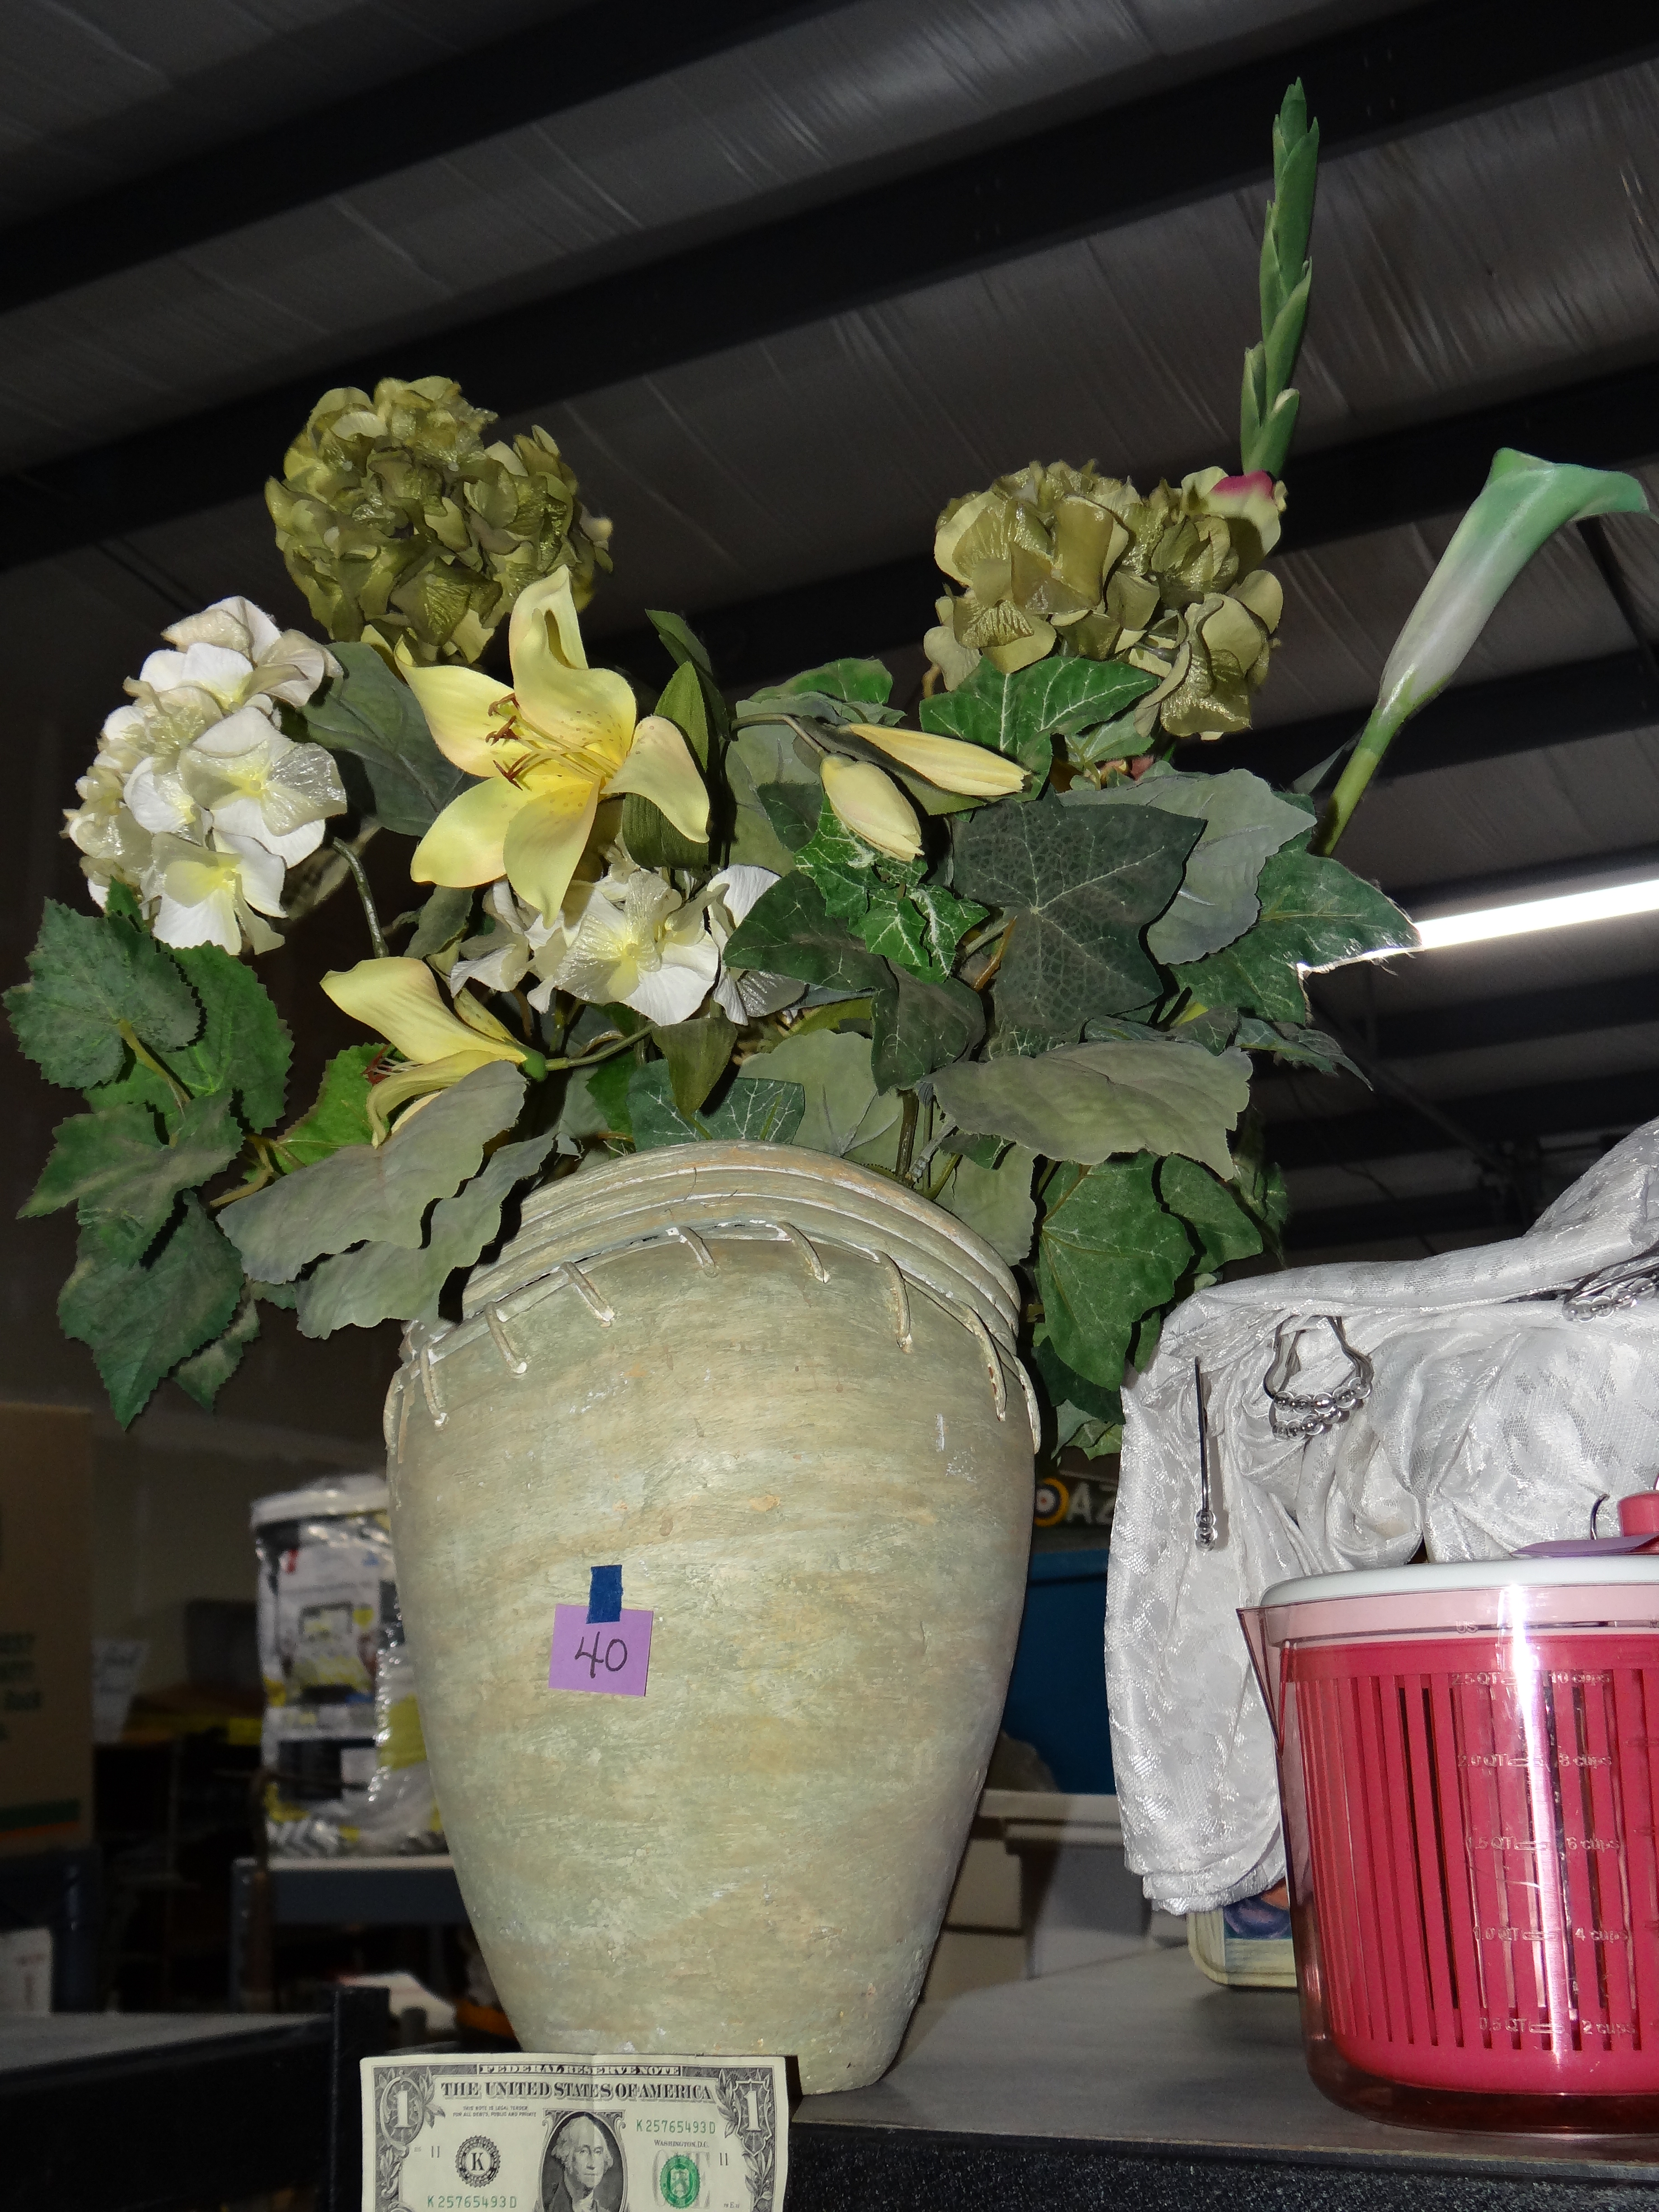 40-Large Sewn Looking Vase w/ Artificial Flowers In It